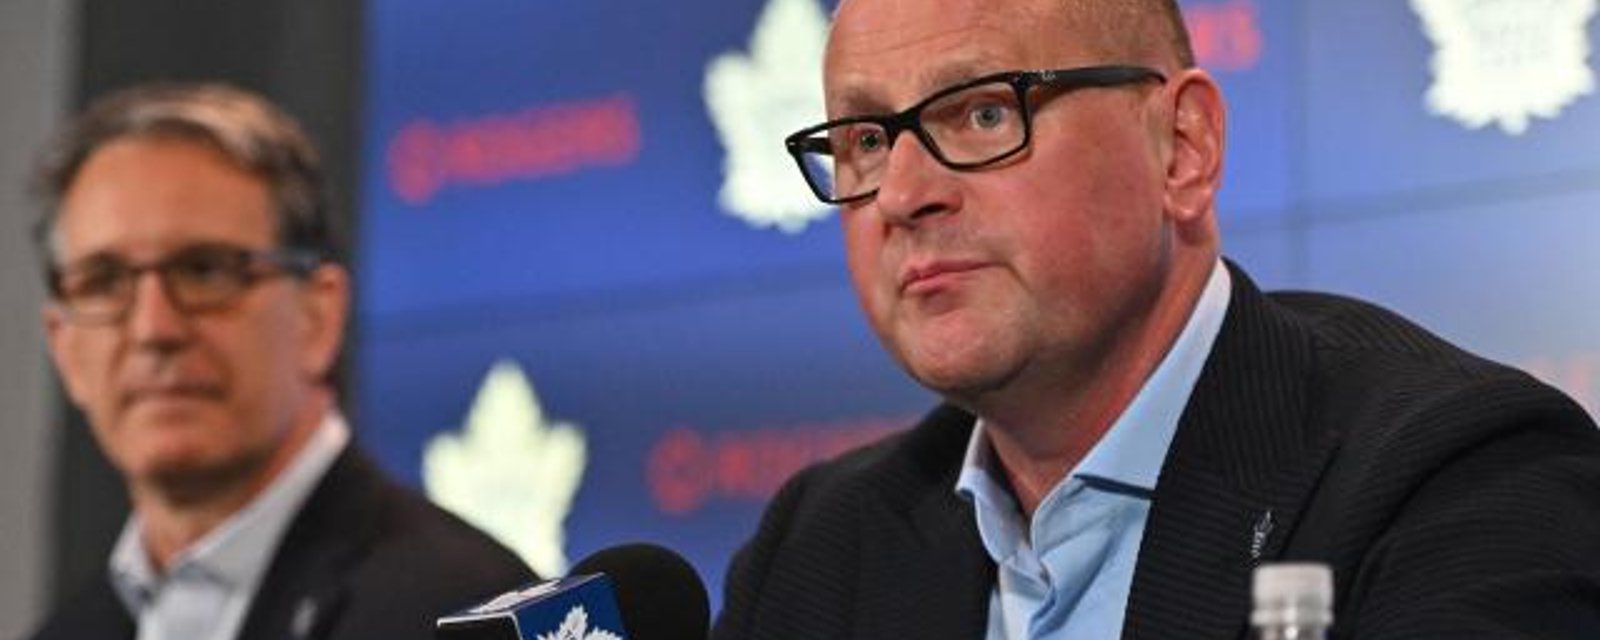 Could the Maple Leafs poach an Original 6 rival? 